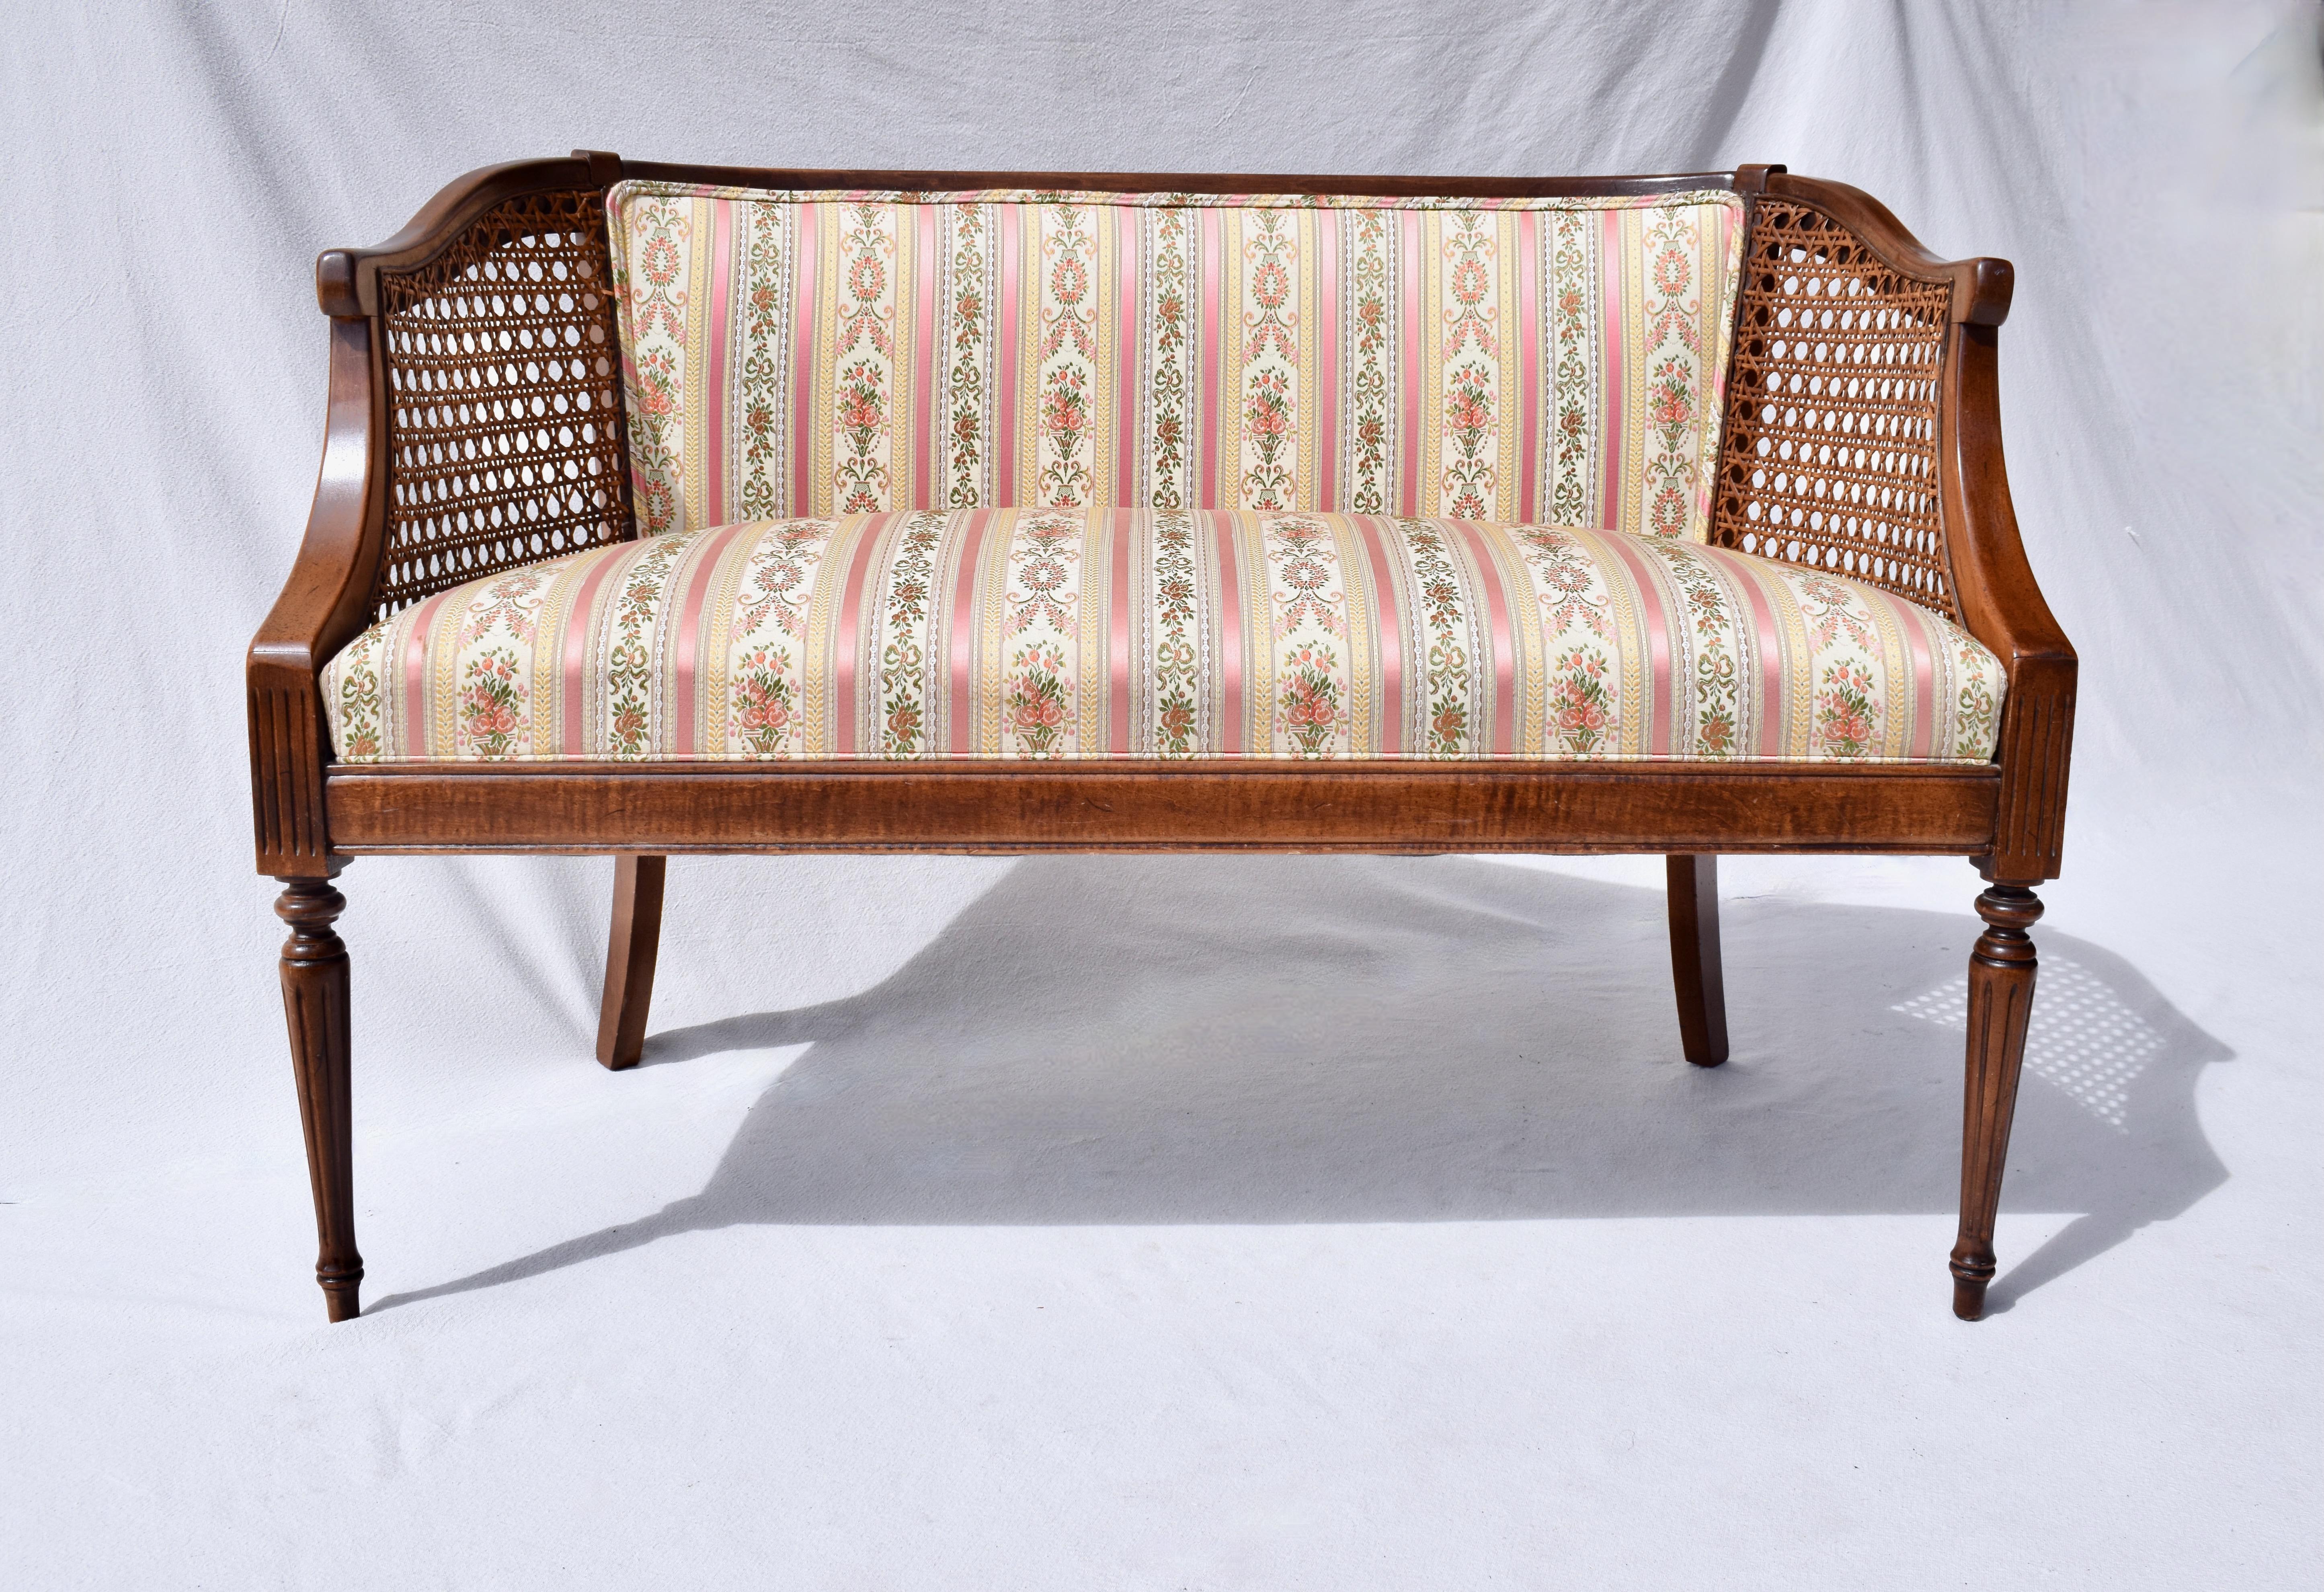 A very sweet small scale Louis XVI style settee in pink & green damask stripe jacquard floral upholstery; enhanced with a single custom goose down bolster cushion. Excellent vintage condition ready for use. Seat: 19